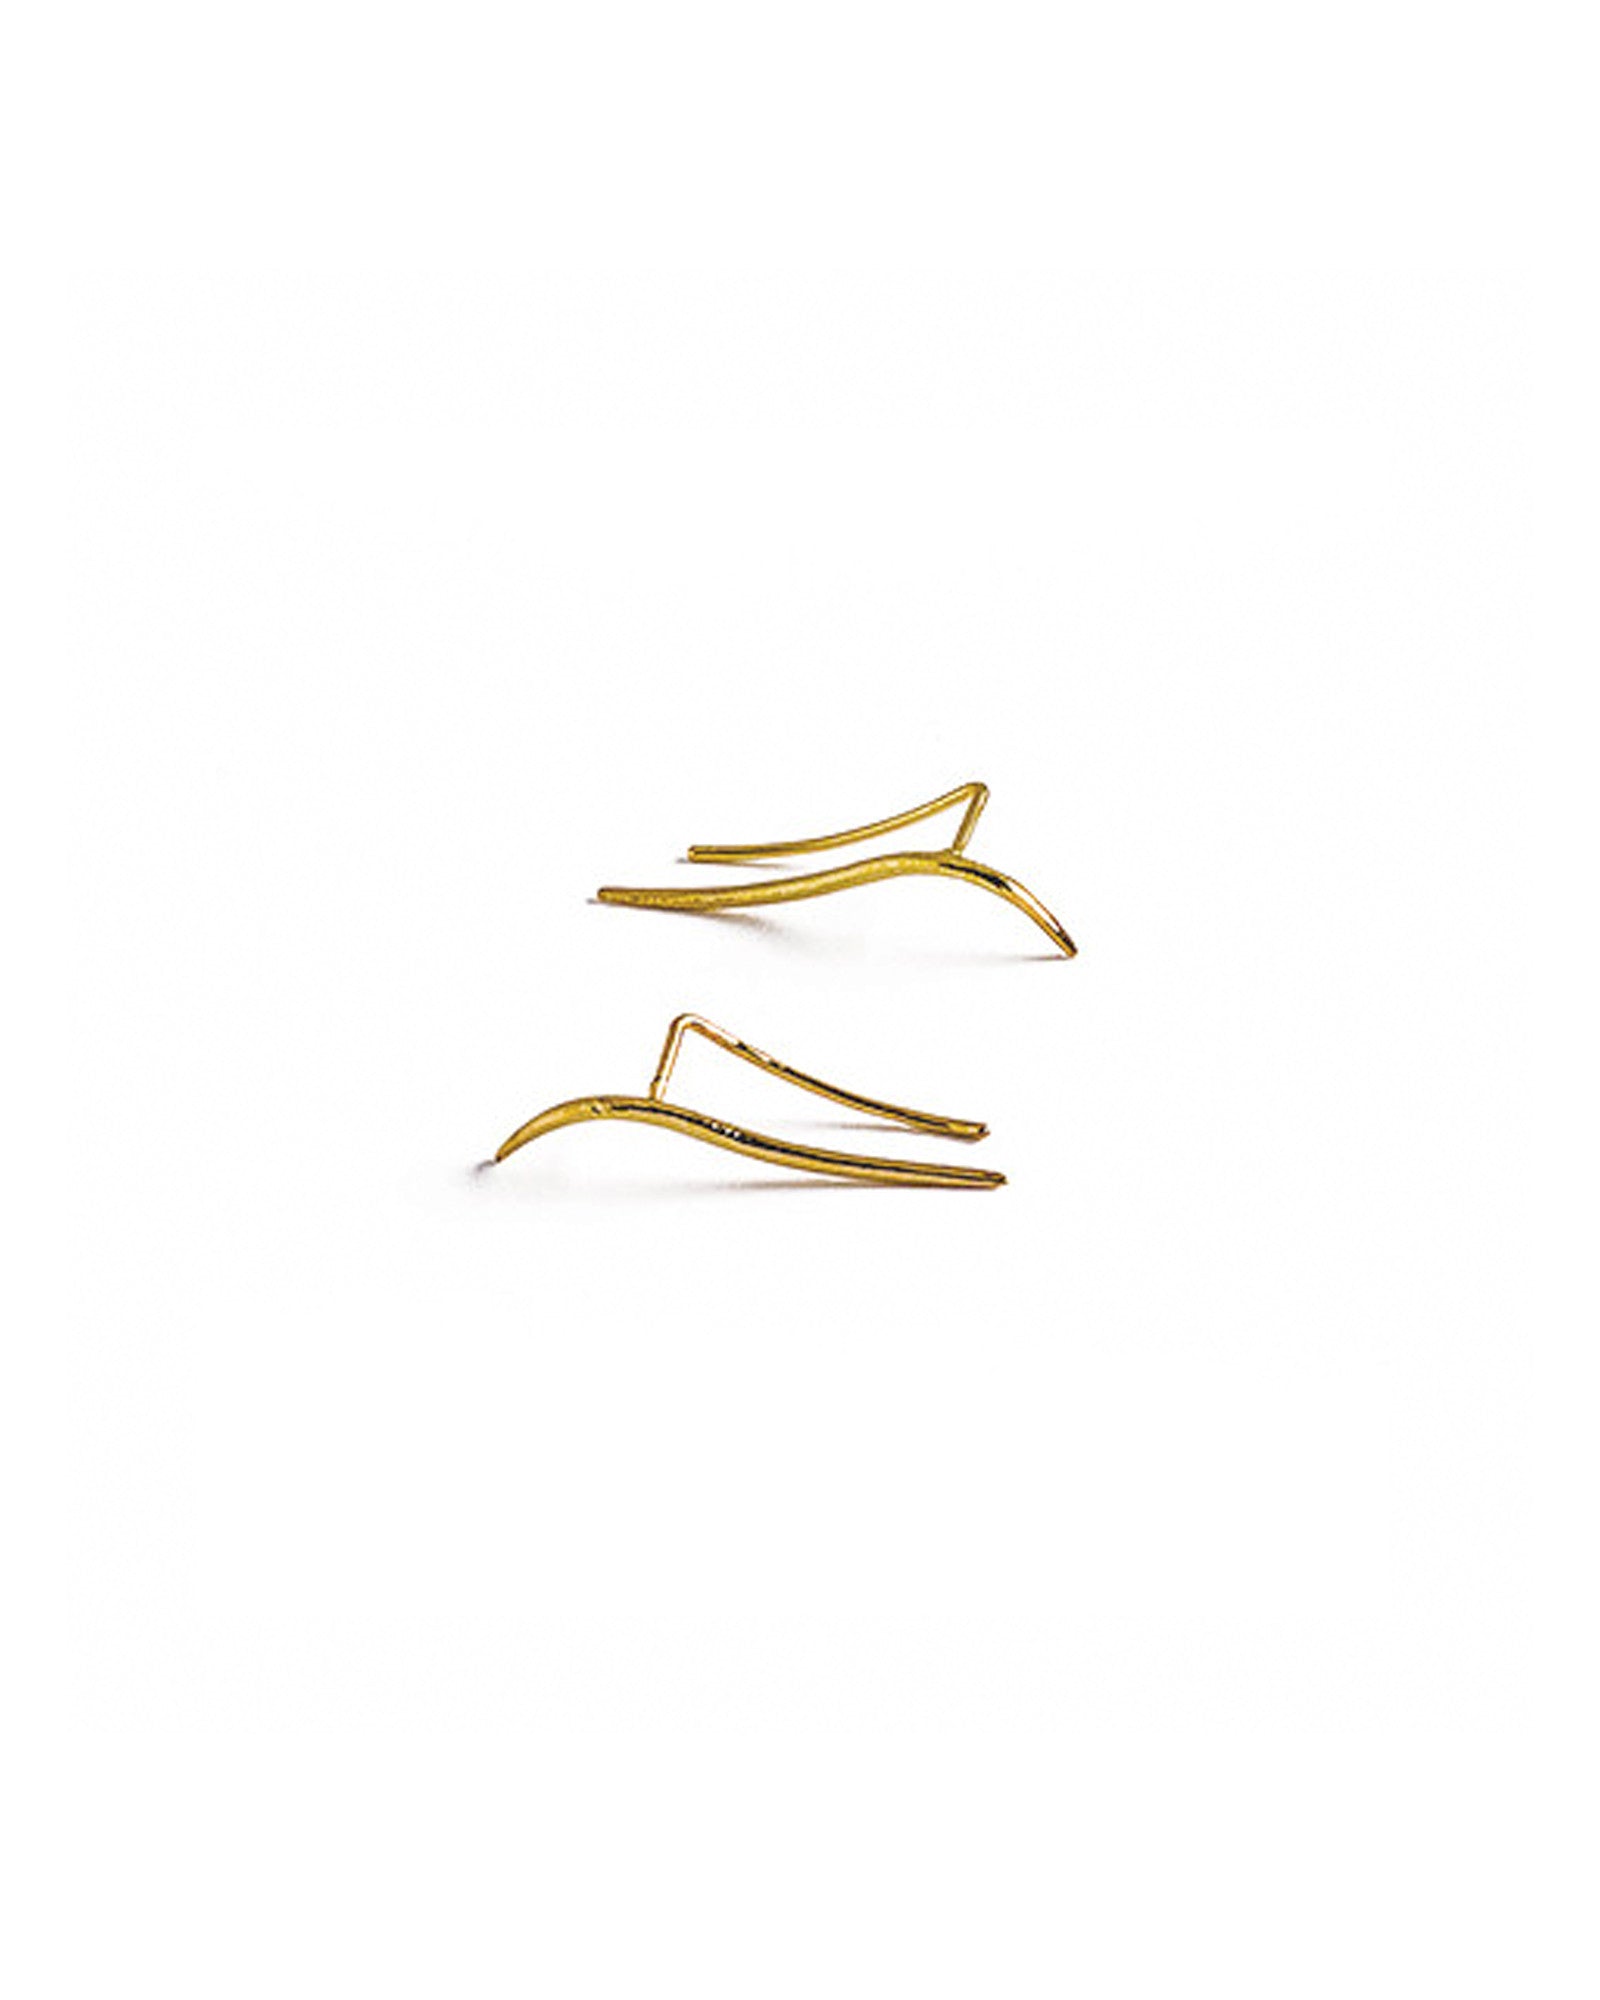 Knobbly Studio Calligraphic Ear Pin Yellow Gold